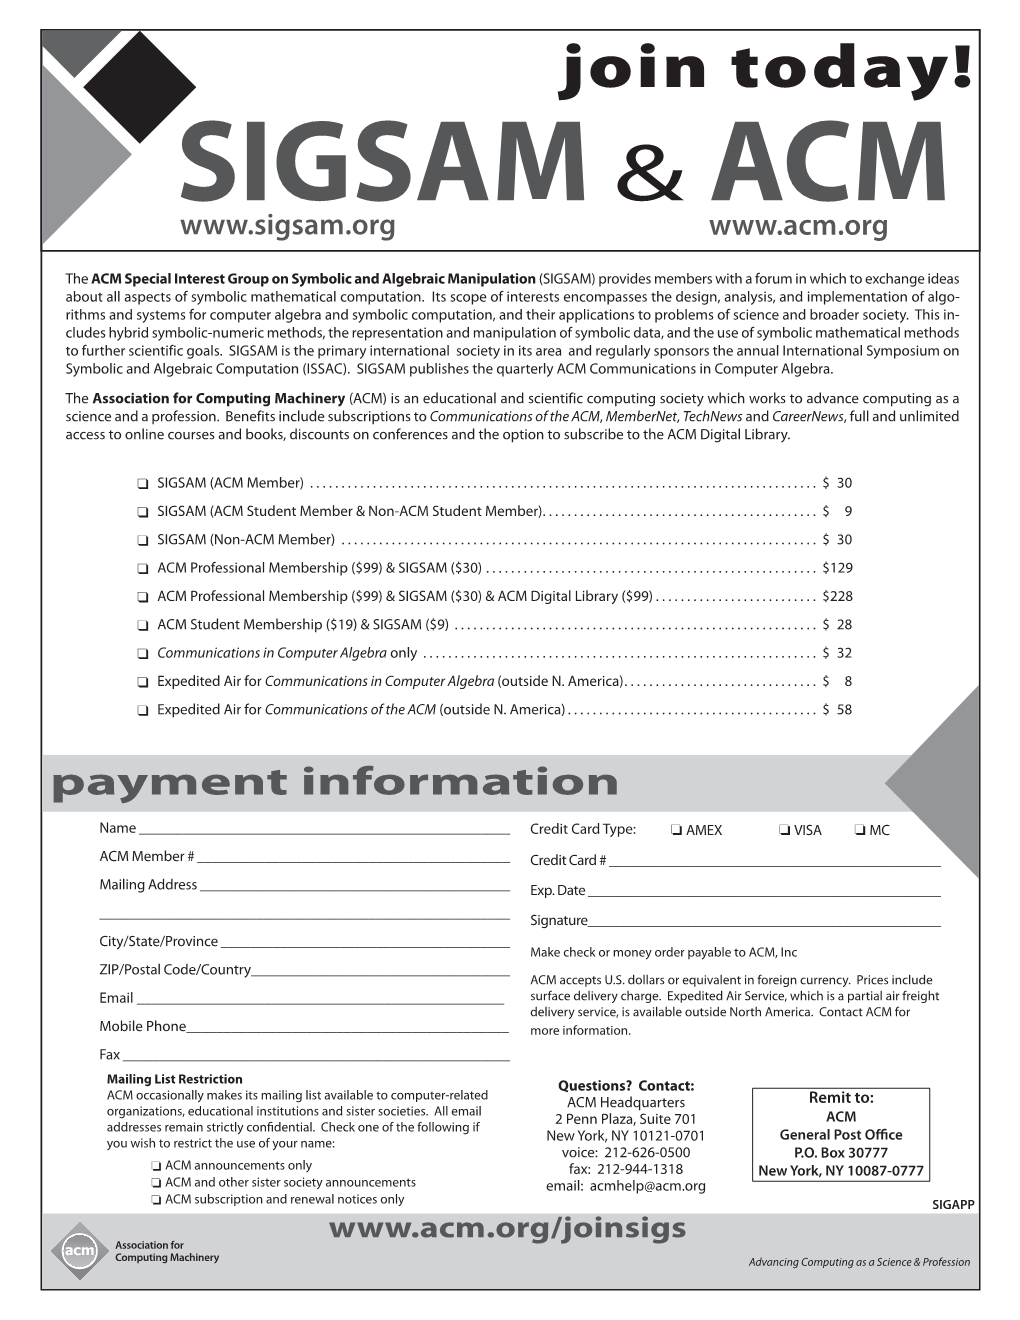 Join Today! SIGSAM & ACM